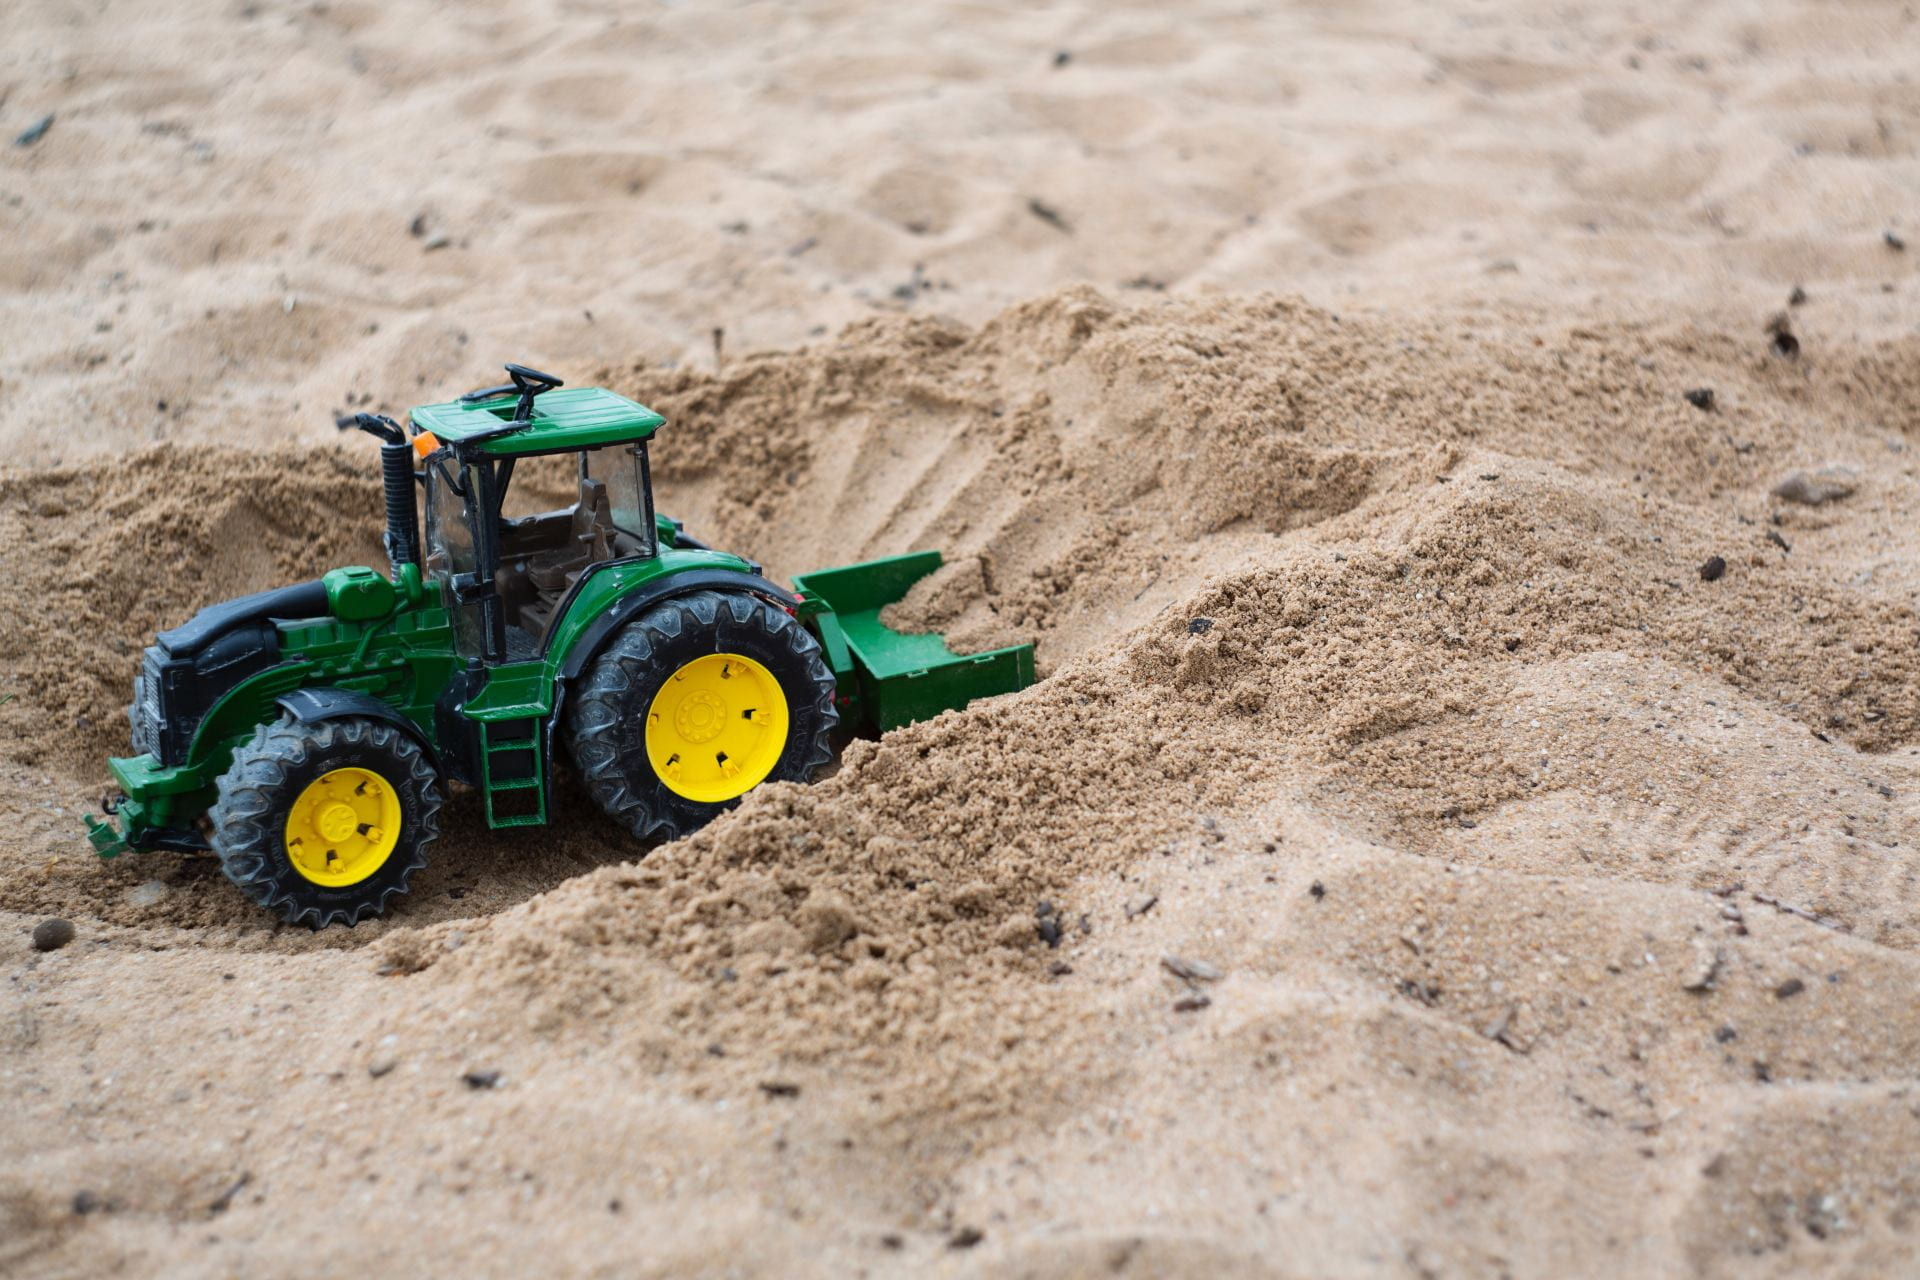 Decorative image of sandbox with a toy truck.